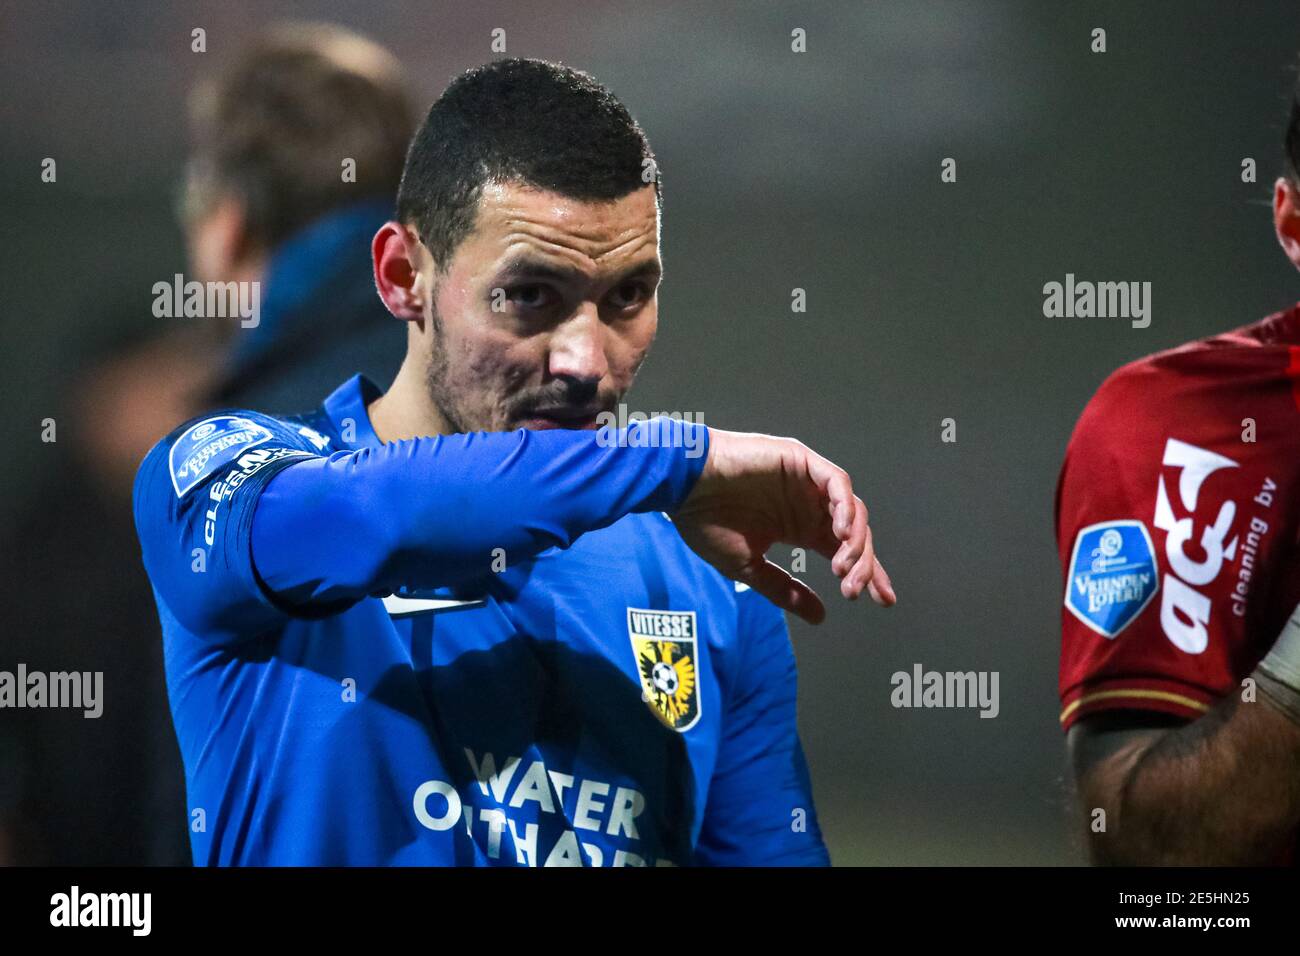 VENLO, NETHERLANDS - JANUARY 27: (L-R): Oussama Darfalou of Vitesse after match end / disappointed after defeat (4:1) during the Dutch Eredivisie matc Stock Photo